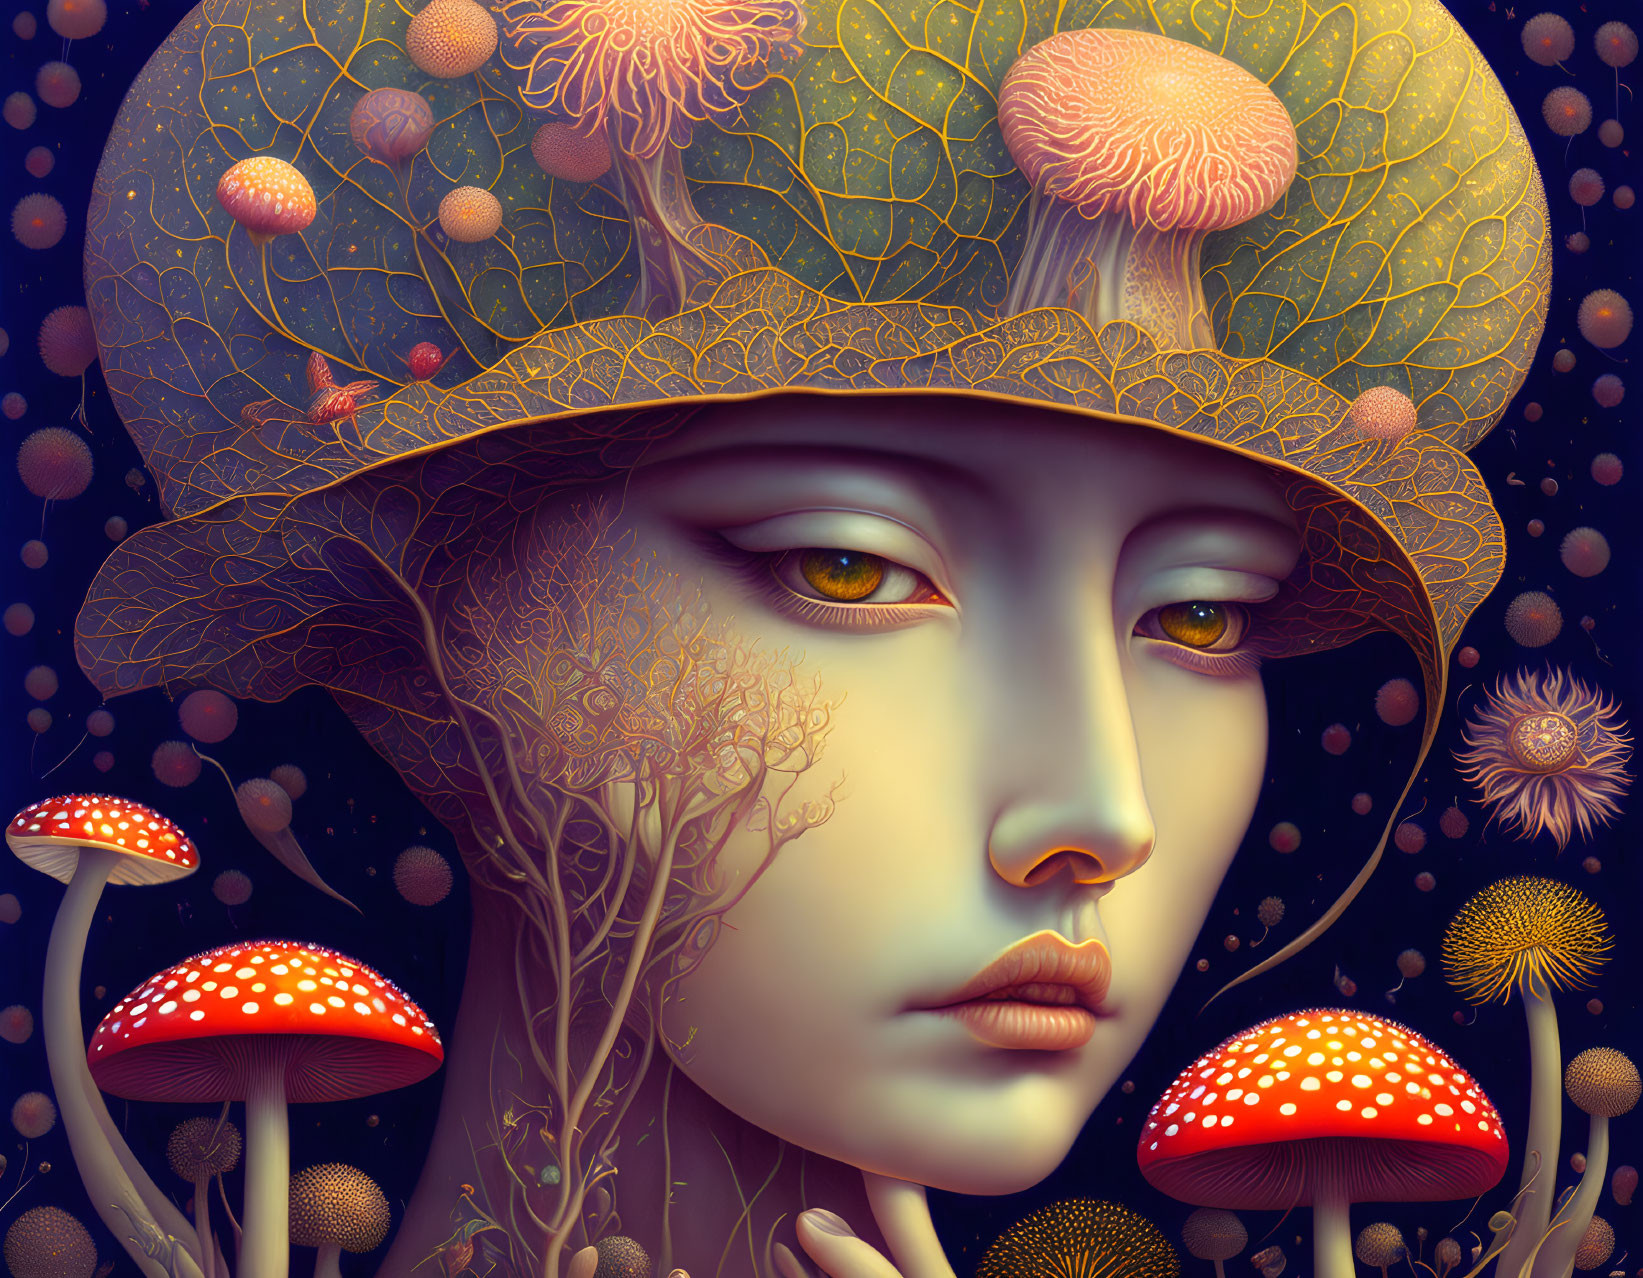 Surreal artwork: person with mushroom and plant features on dark background